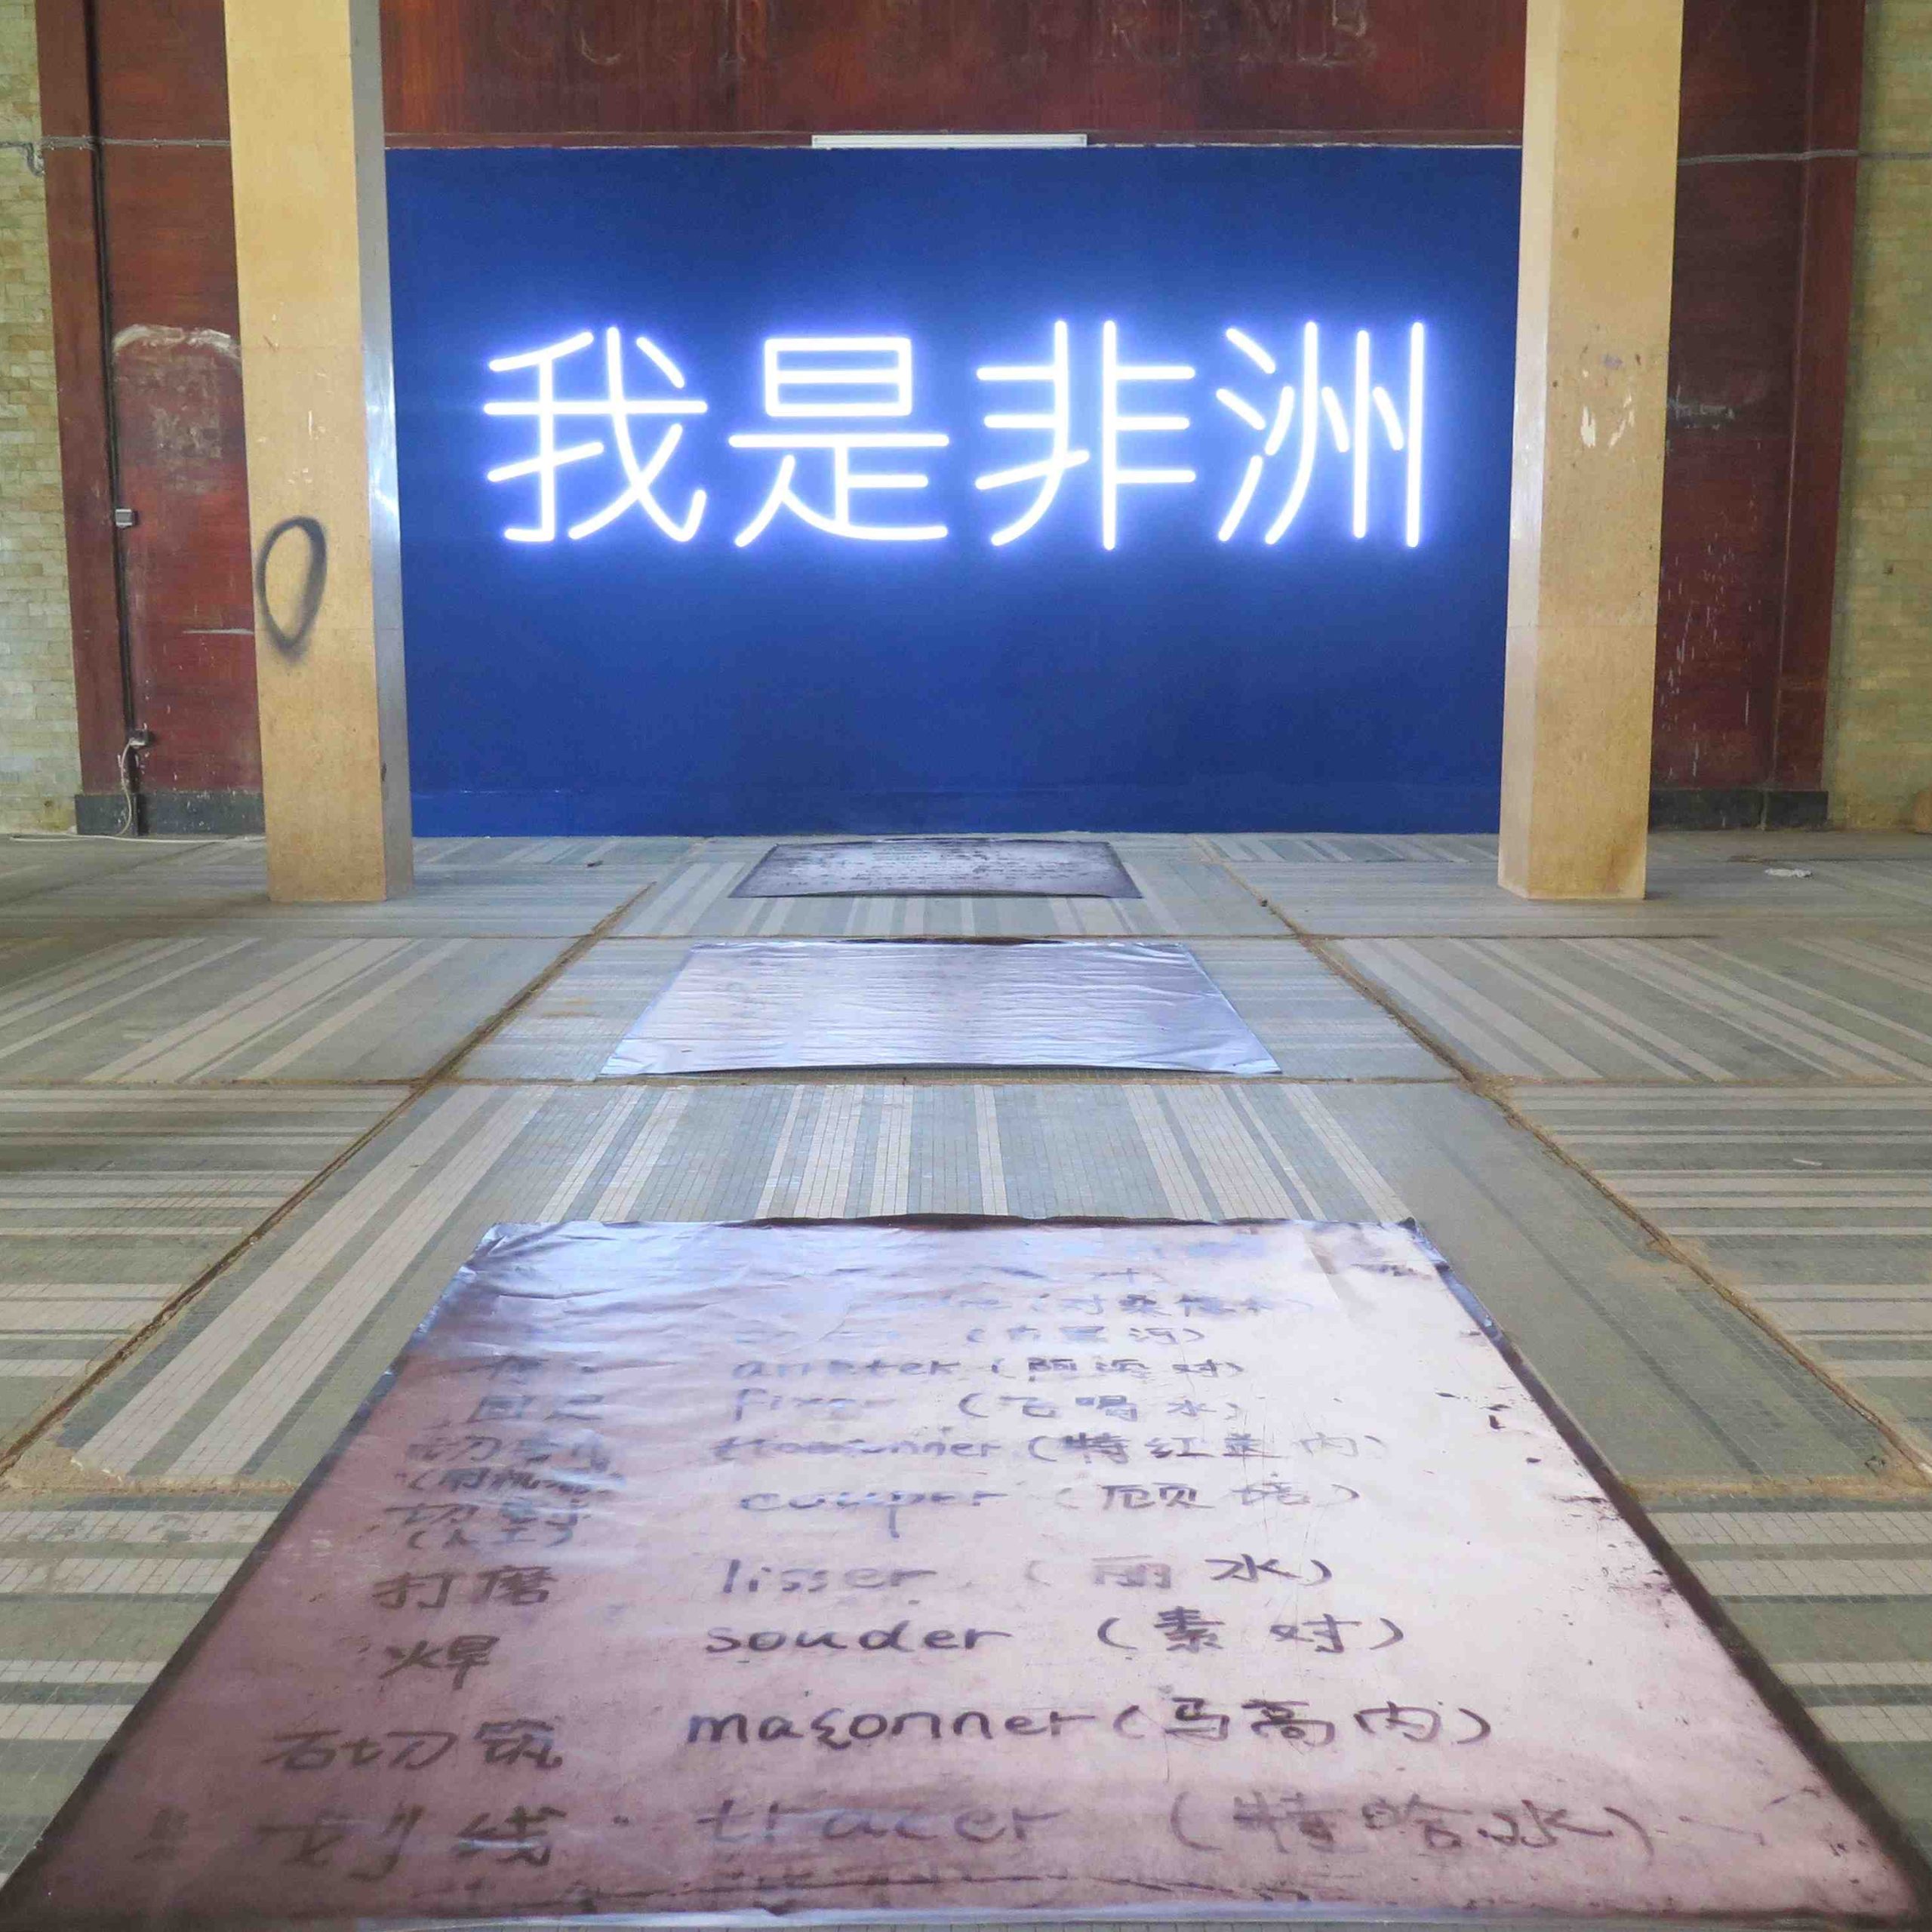 François-Xavier Gbré, 'Wo shi feizhou', exhibited at the 12th edition of La Biennale de Dakar, May 2016. Image courtesy of Galerie Cécile Fakhoury. 